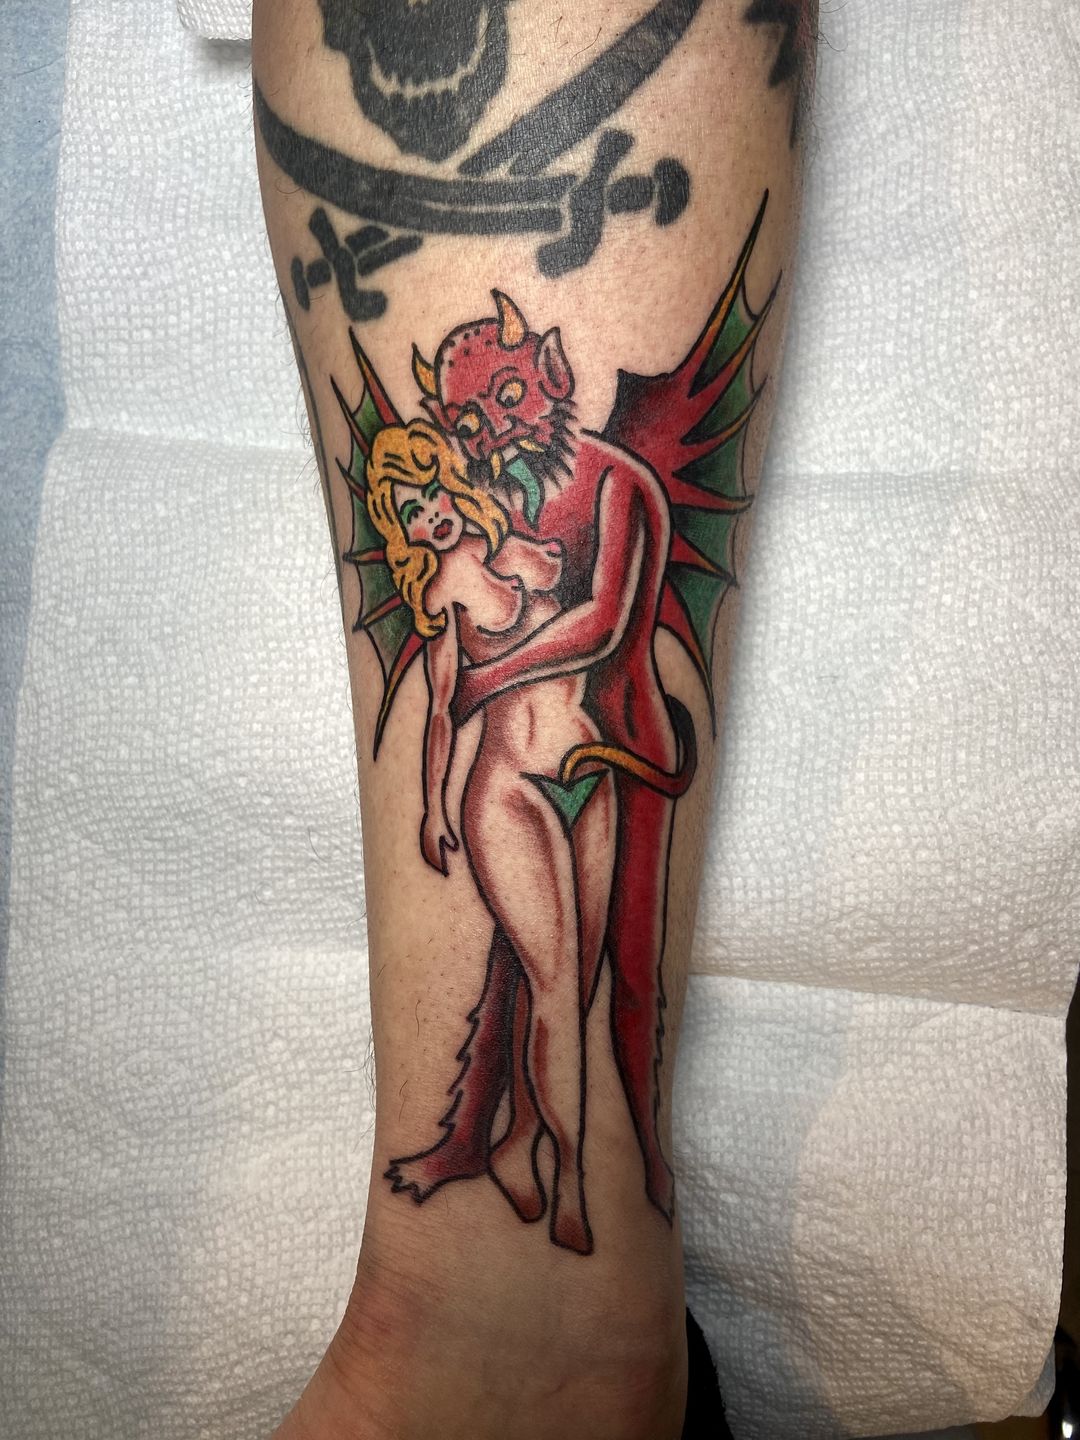 Pinup Princess Daisy done by Ian at Sanctuary tattoo in Portland OR    rtattoos